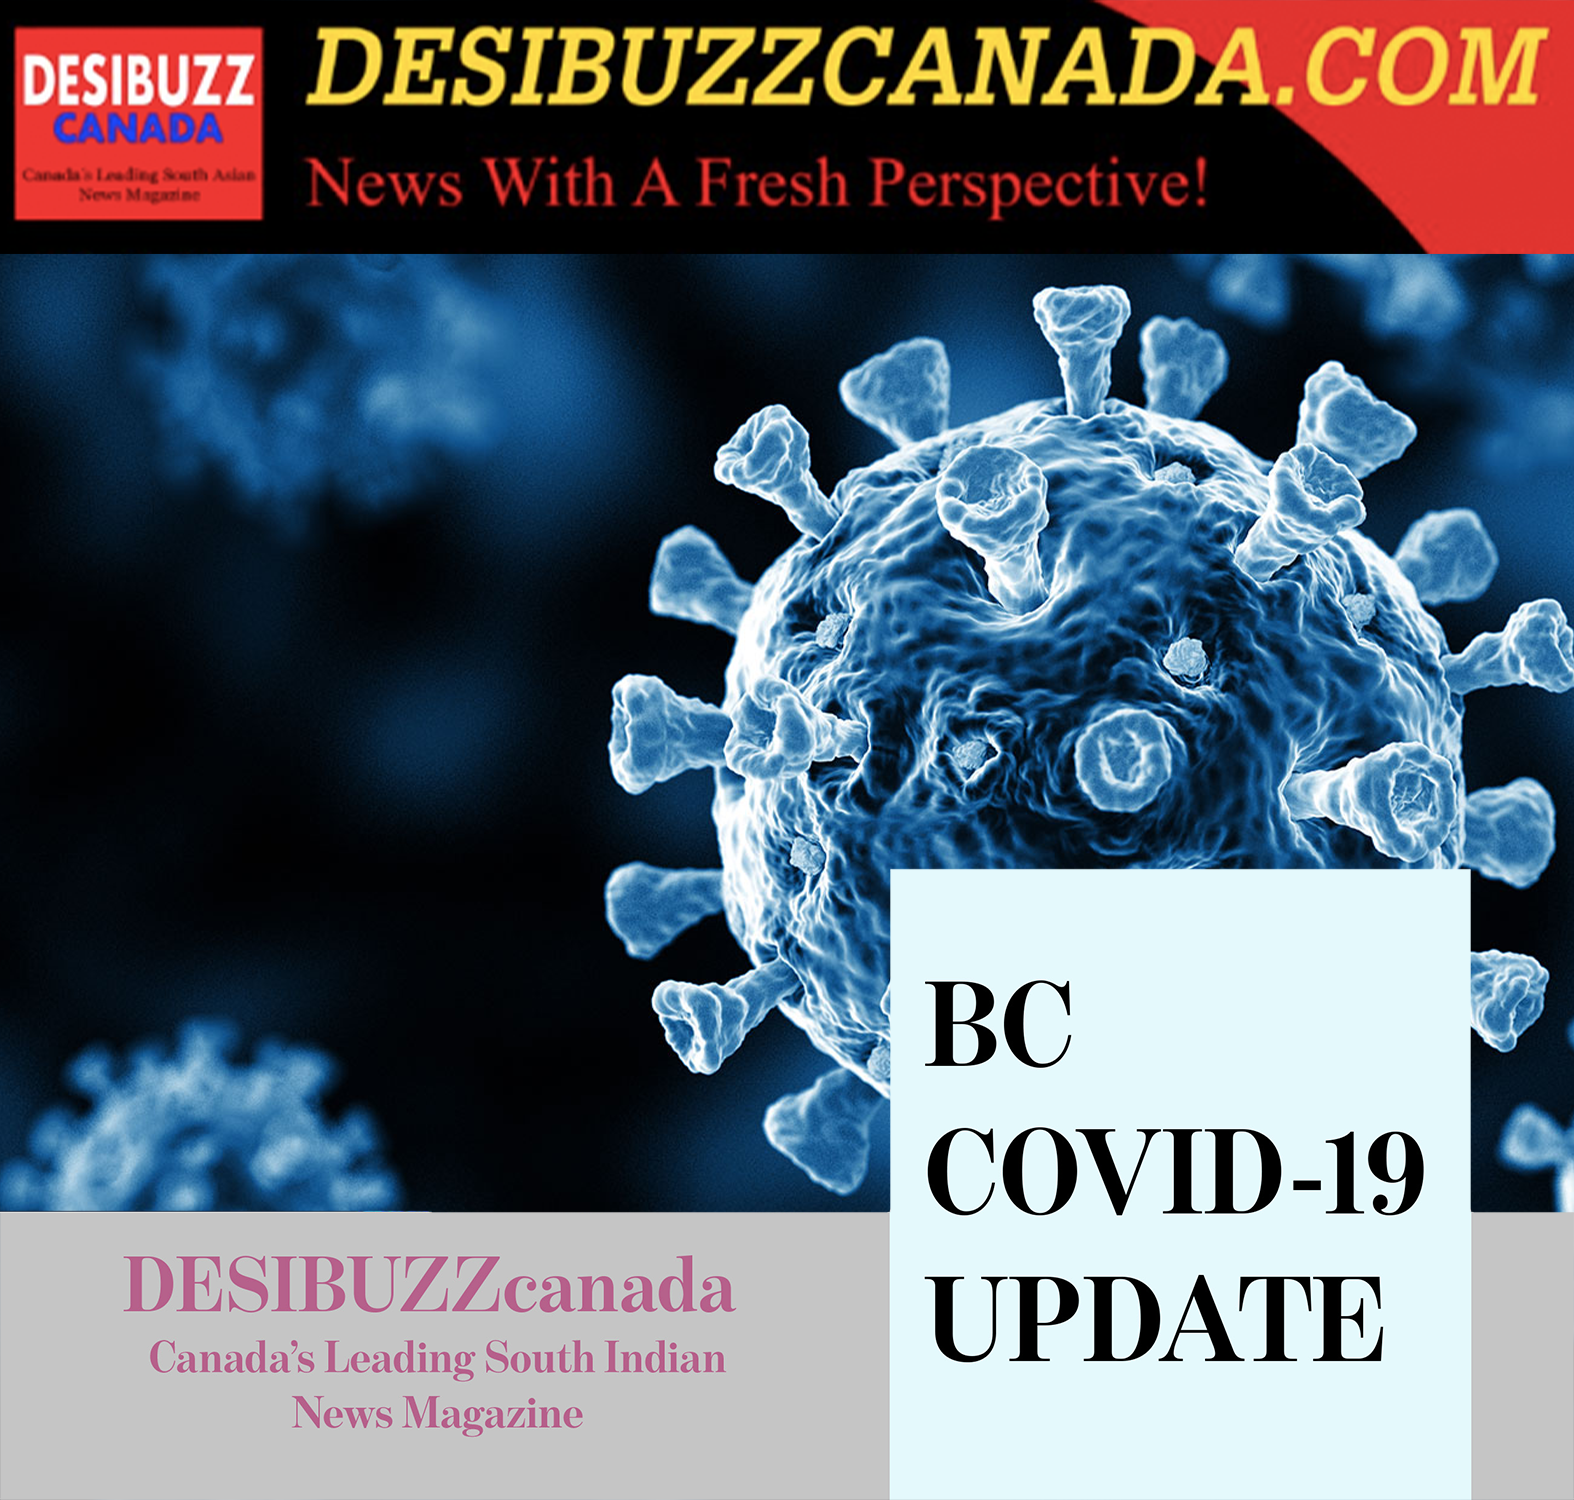 BC COVID-19 UPDATE: Weekend Sees 14 Deaths While Daily Cases Continue To Decline